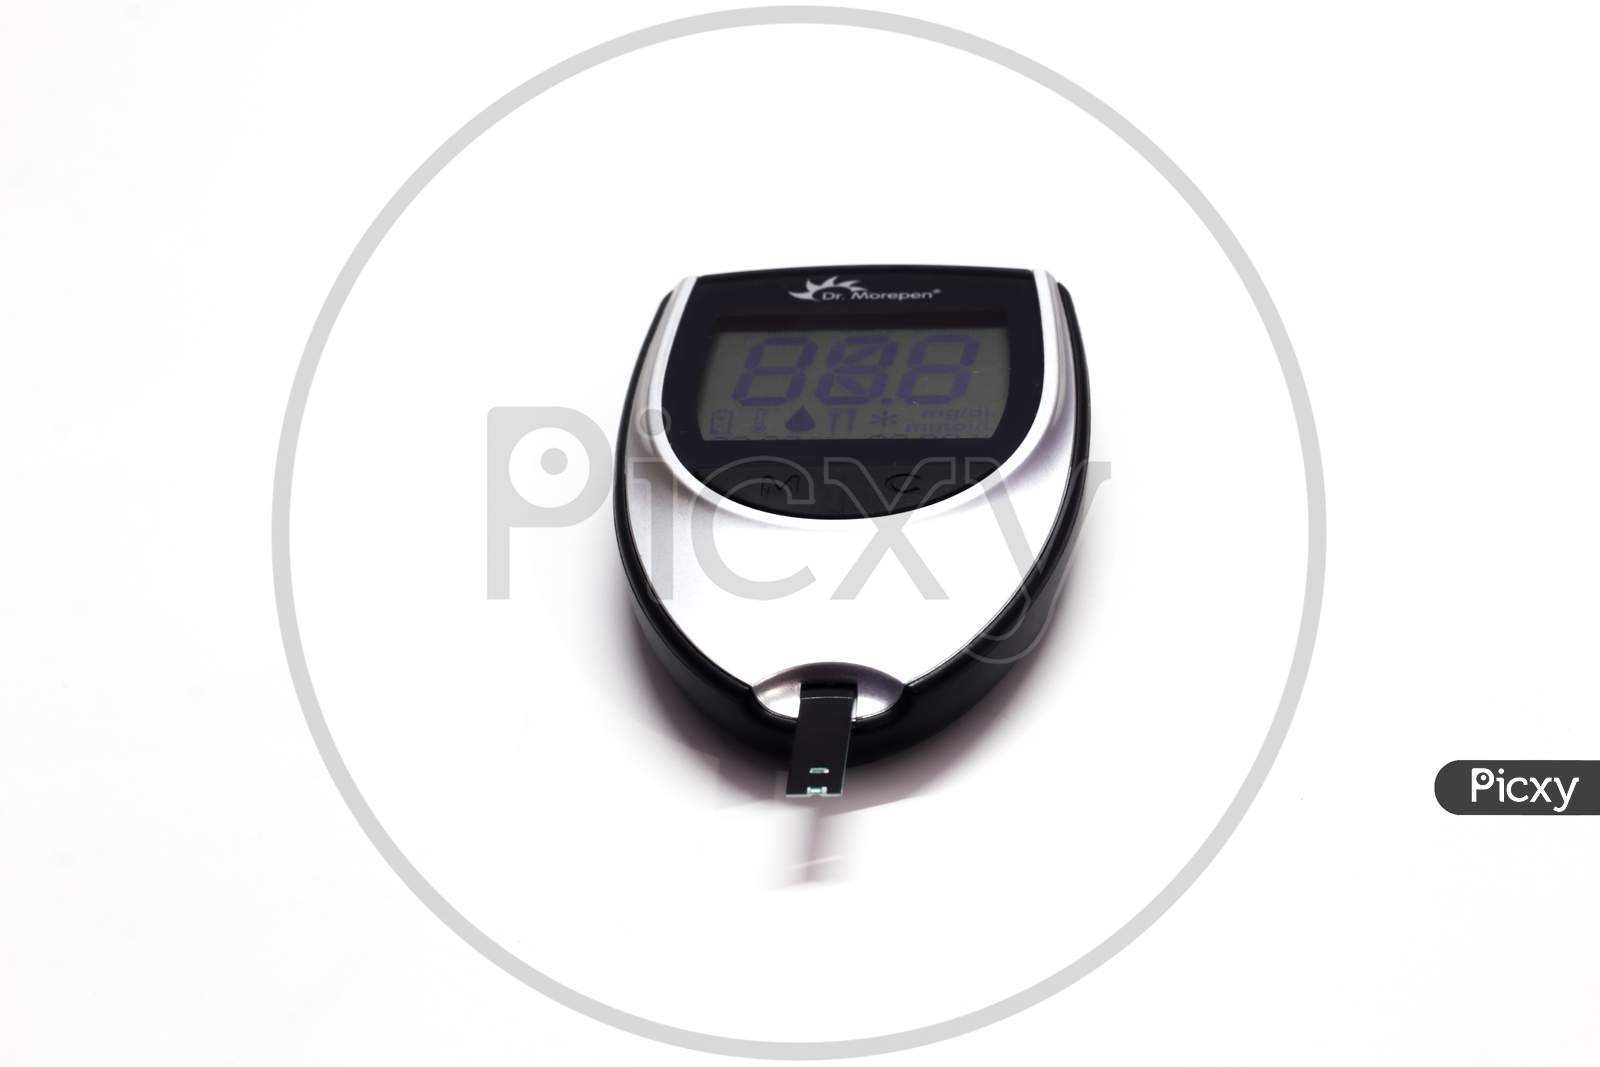 Diabetes Check Machine With Digital Screen, Device For Measuring Blood Sugar, Medical Device For Blood Glucose Levels Test. Isolated On White Background With Space For Text